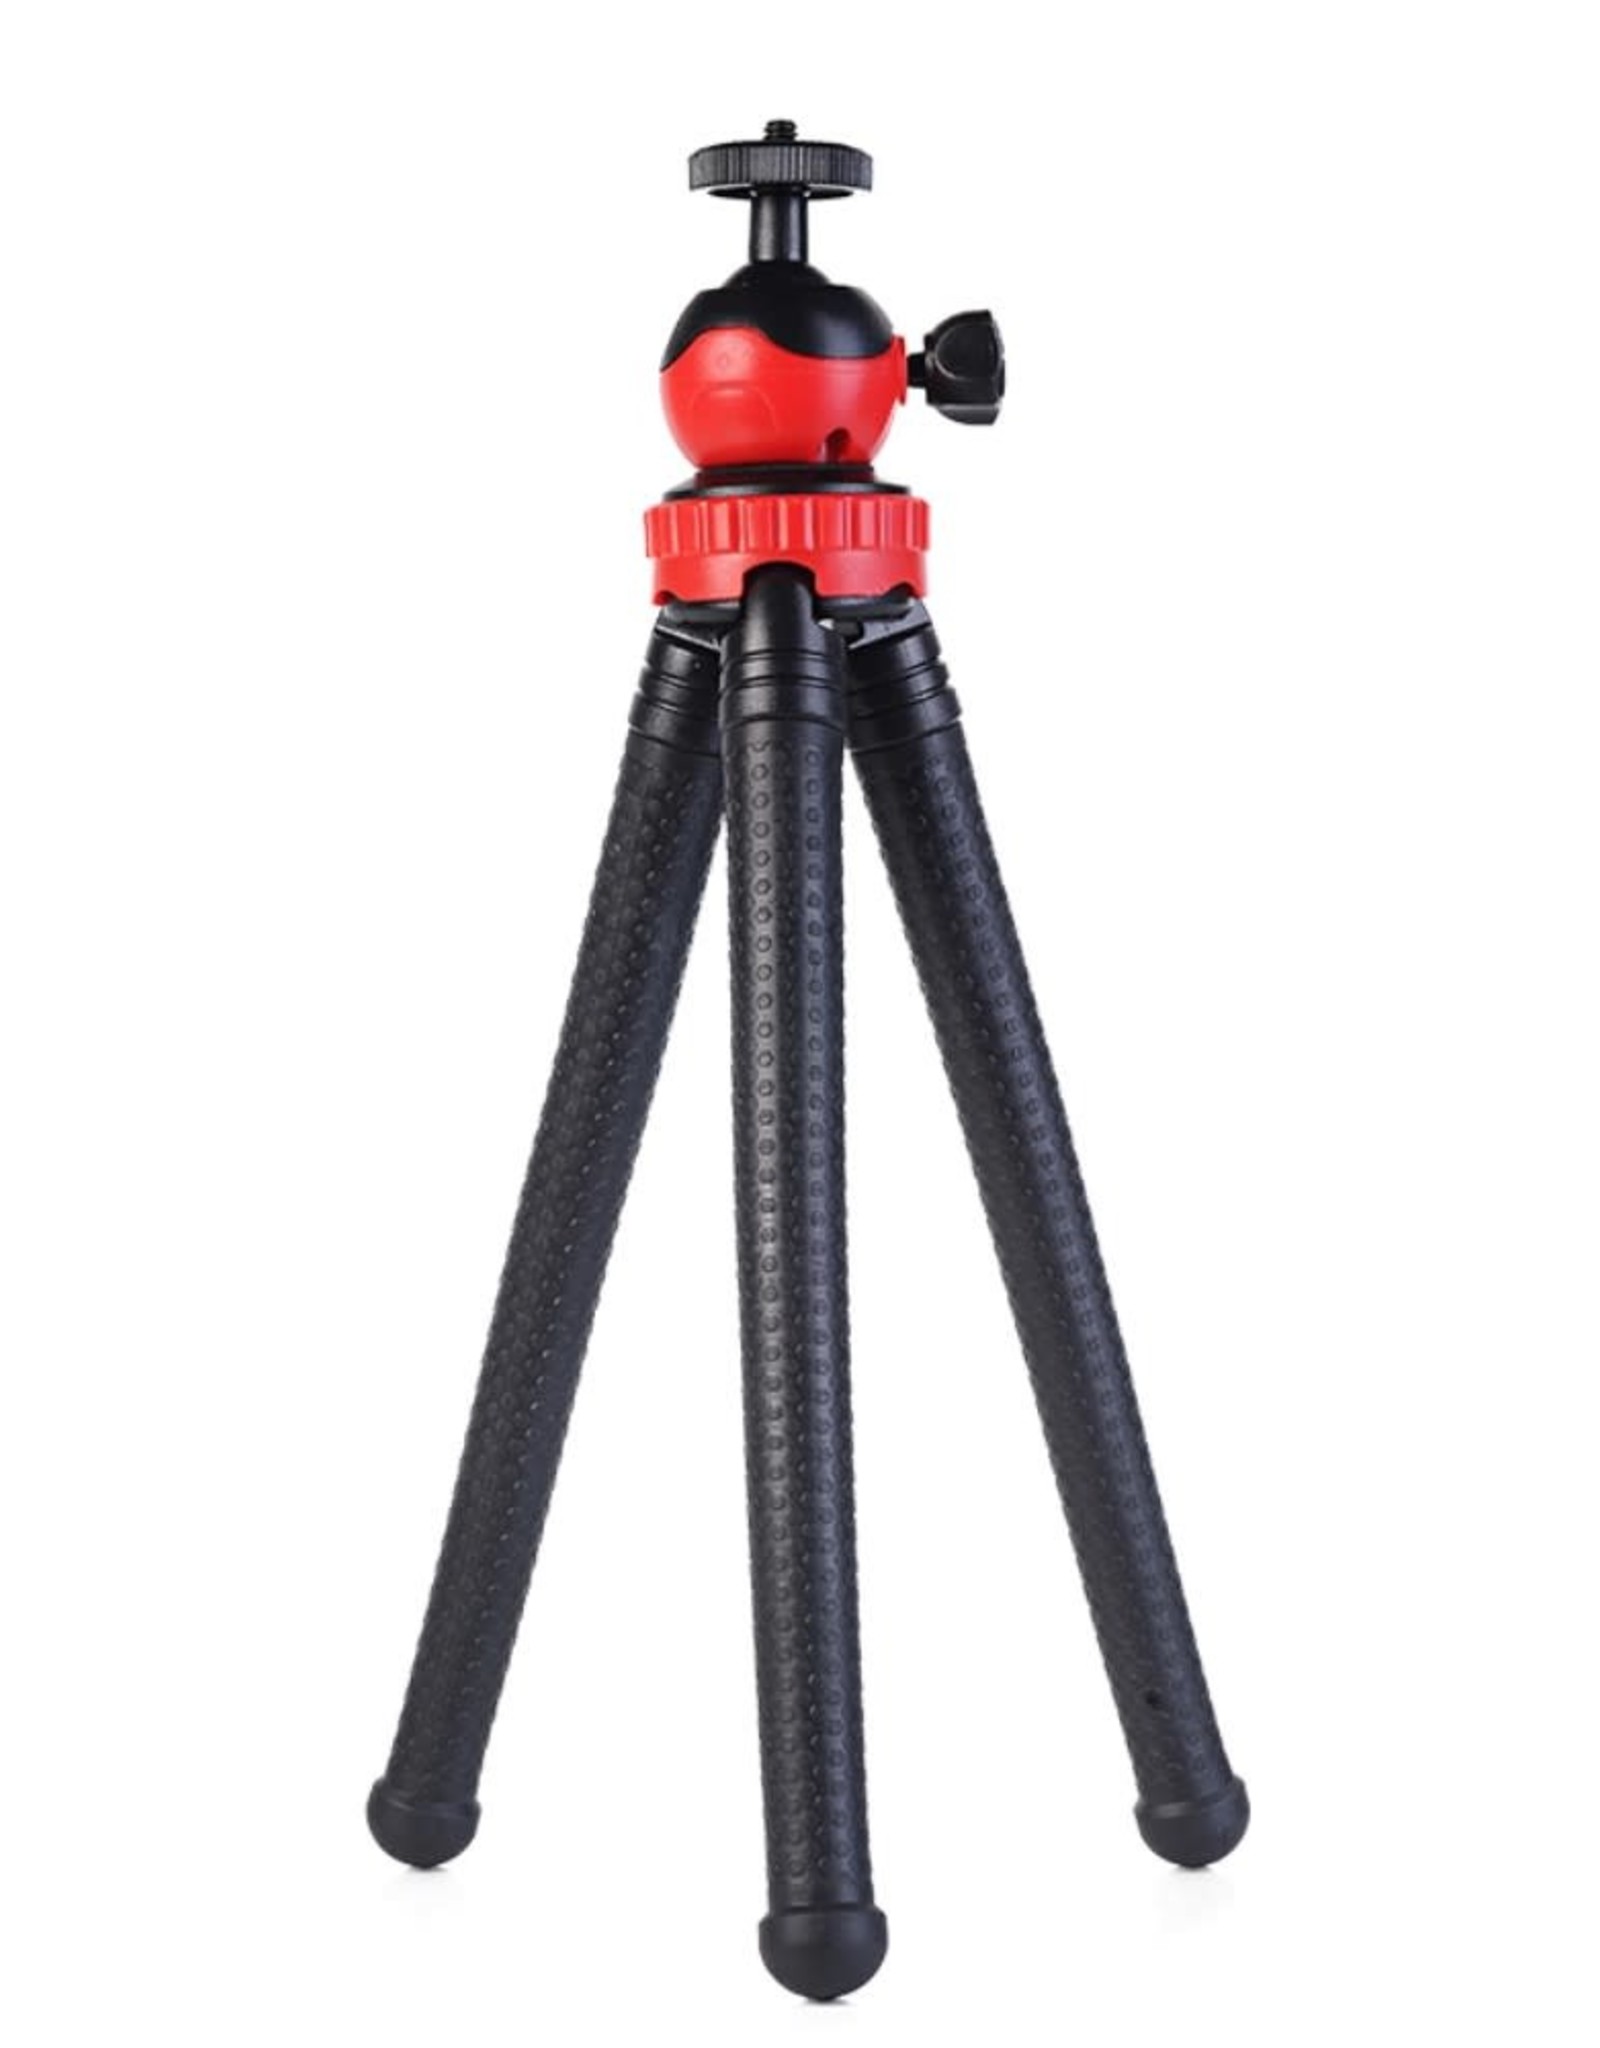 360 Degree Rotation Octopus Tripod Stand